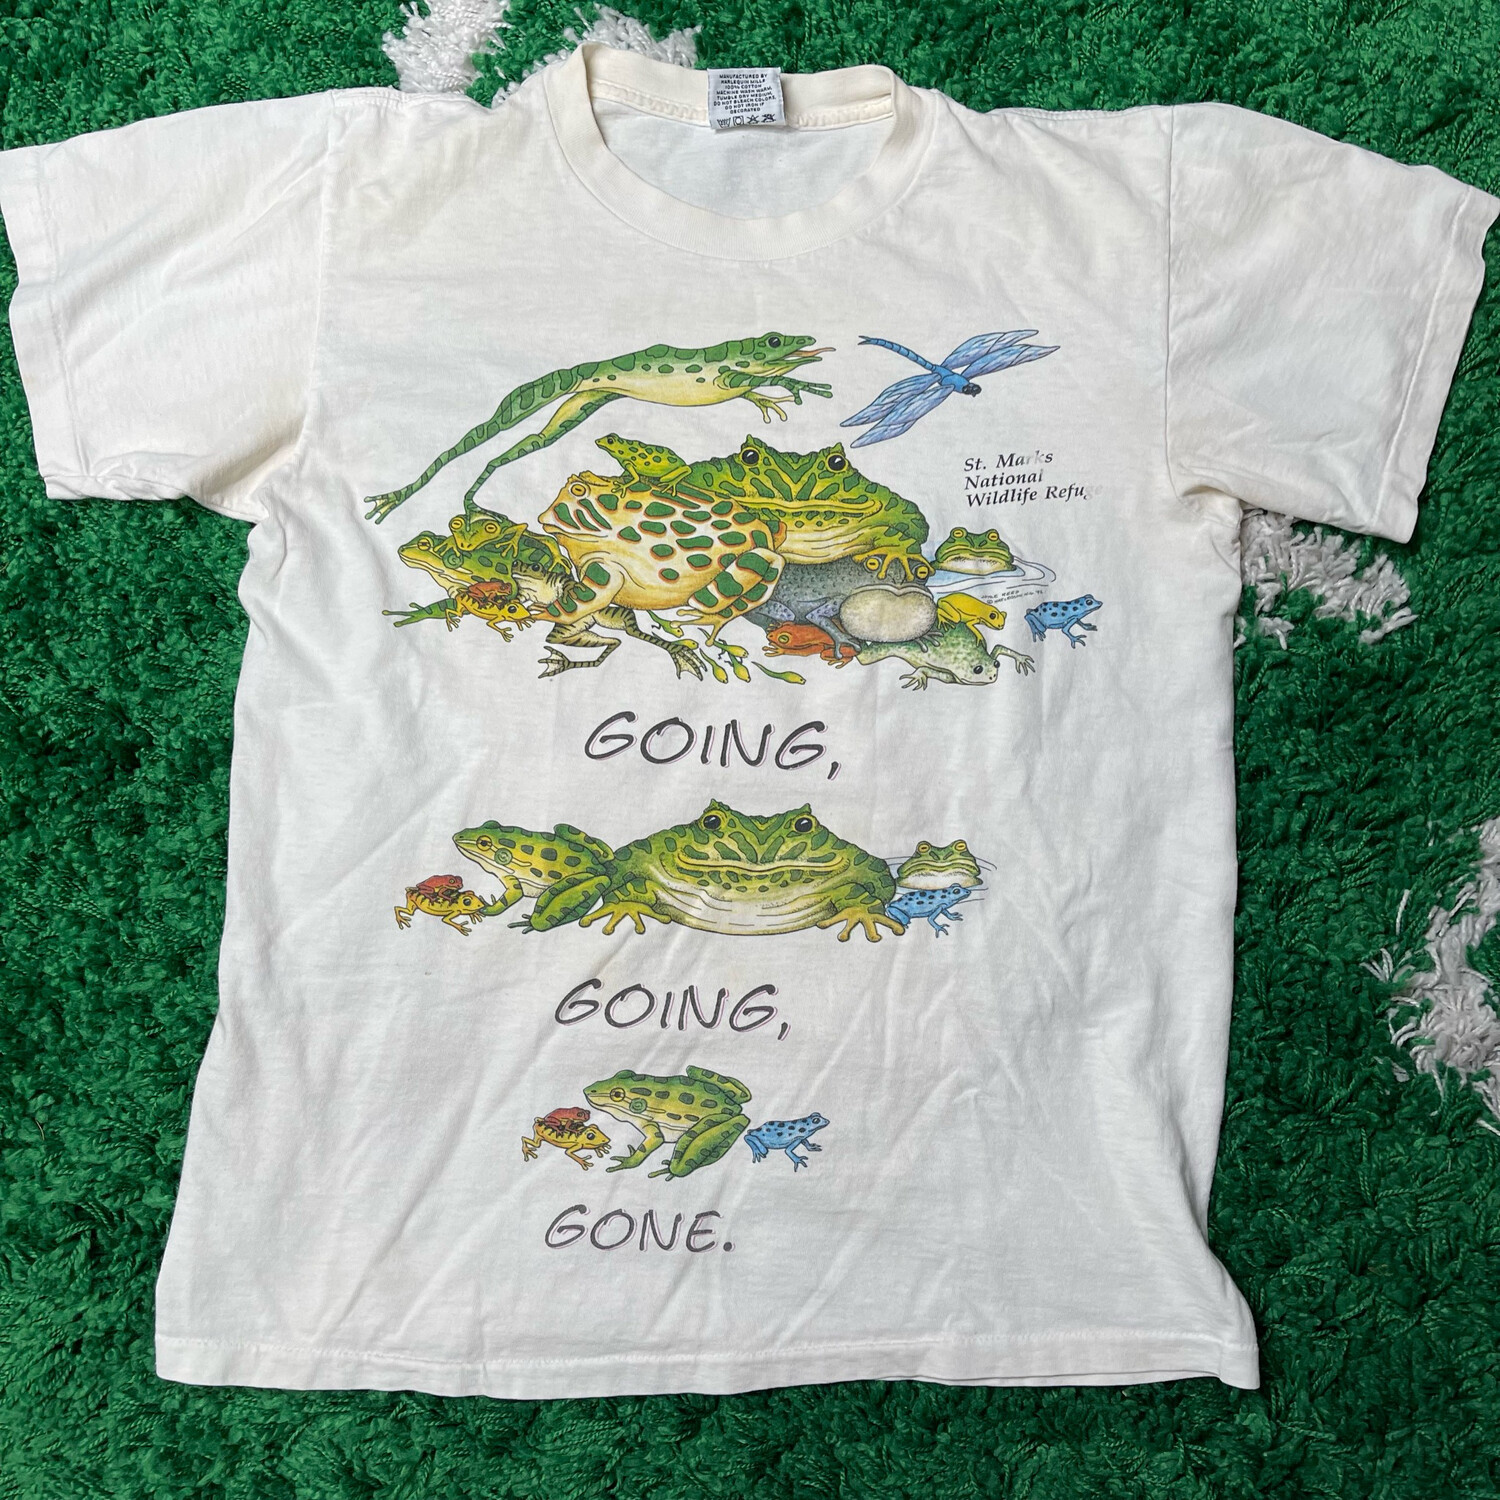 Going Going Gone Frog Tee Size Medium